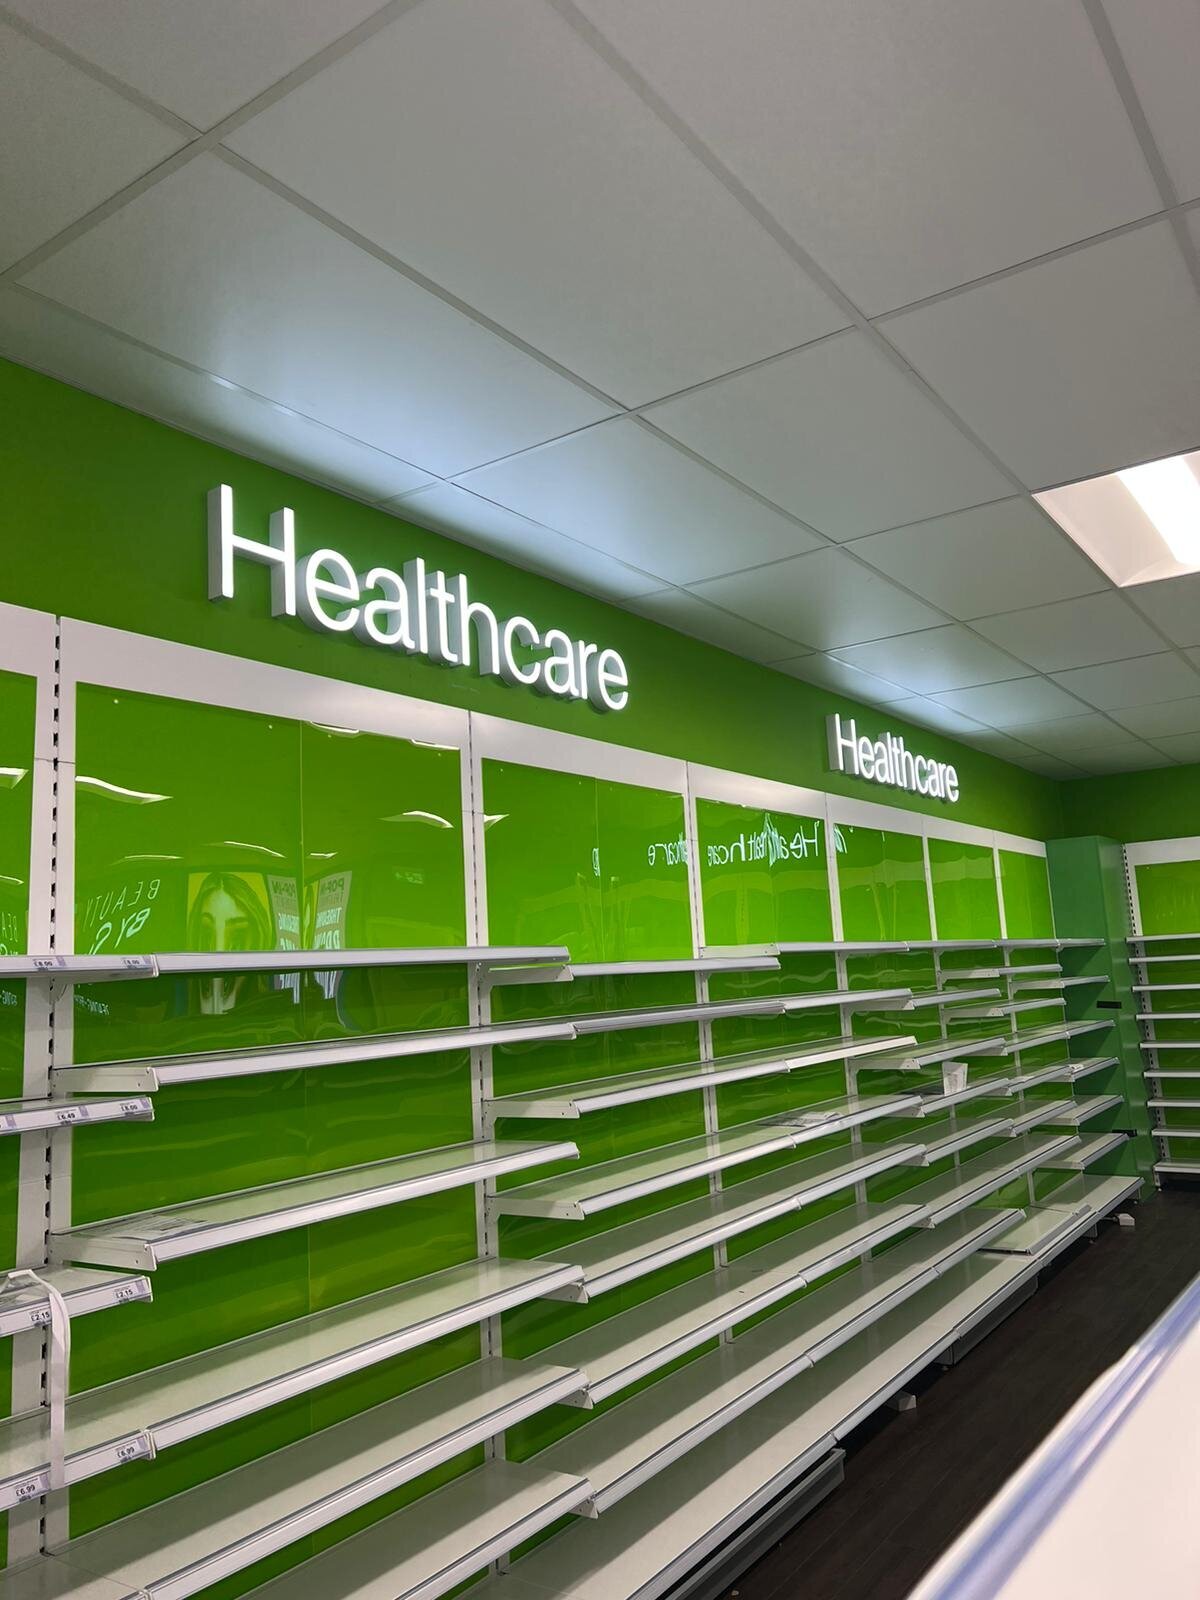 ellis-signs-healthcare-illuminated-built-up-letters